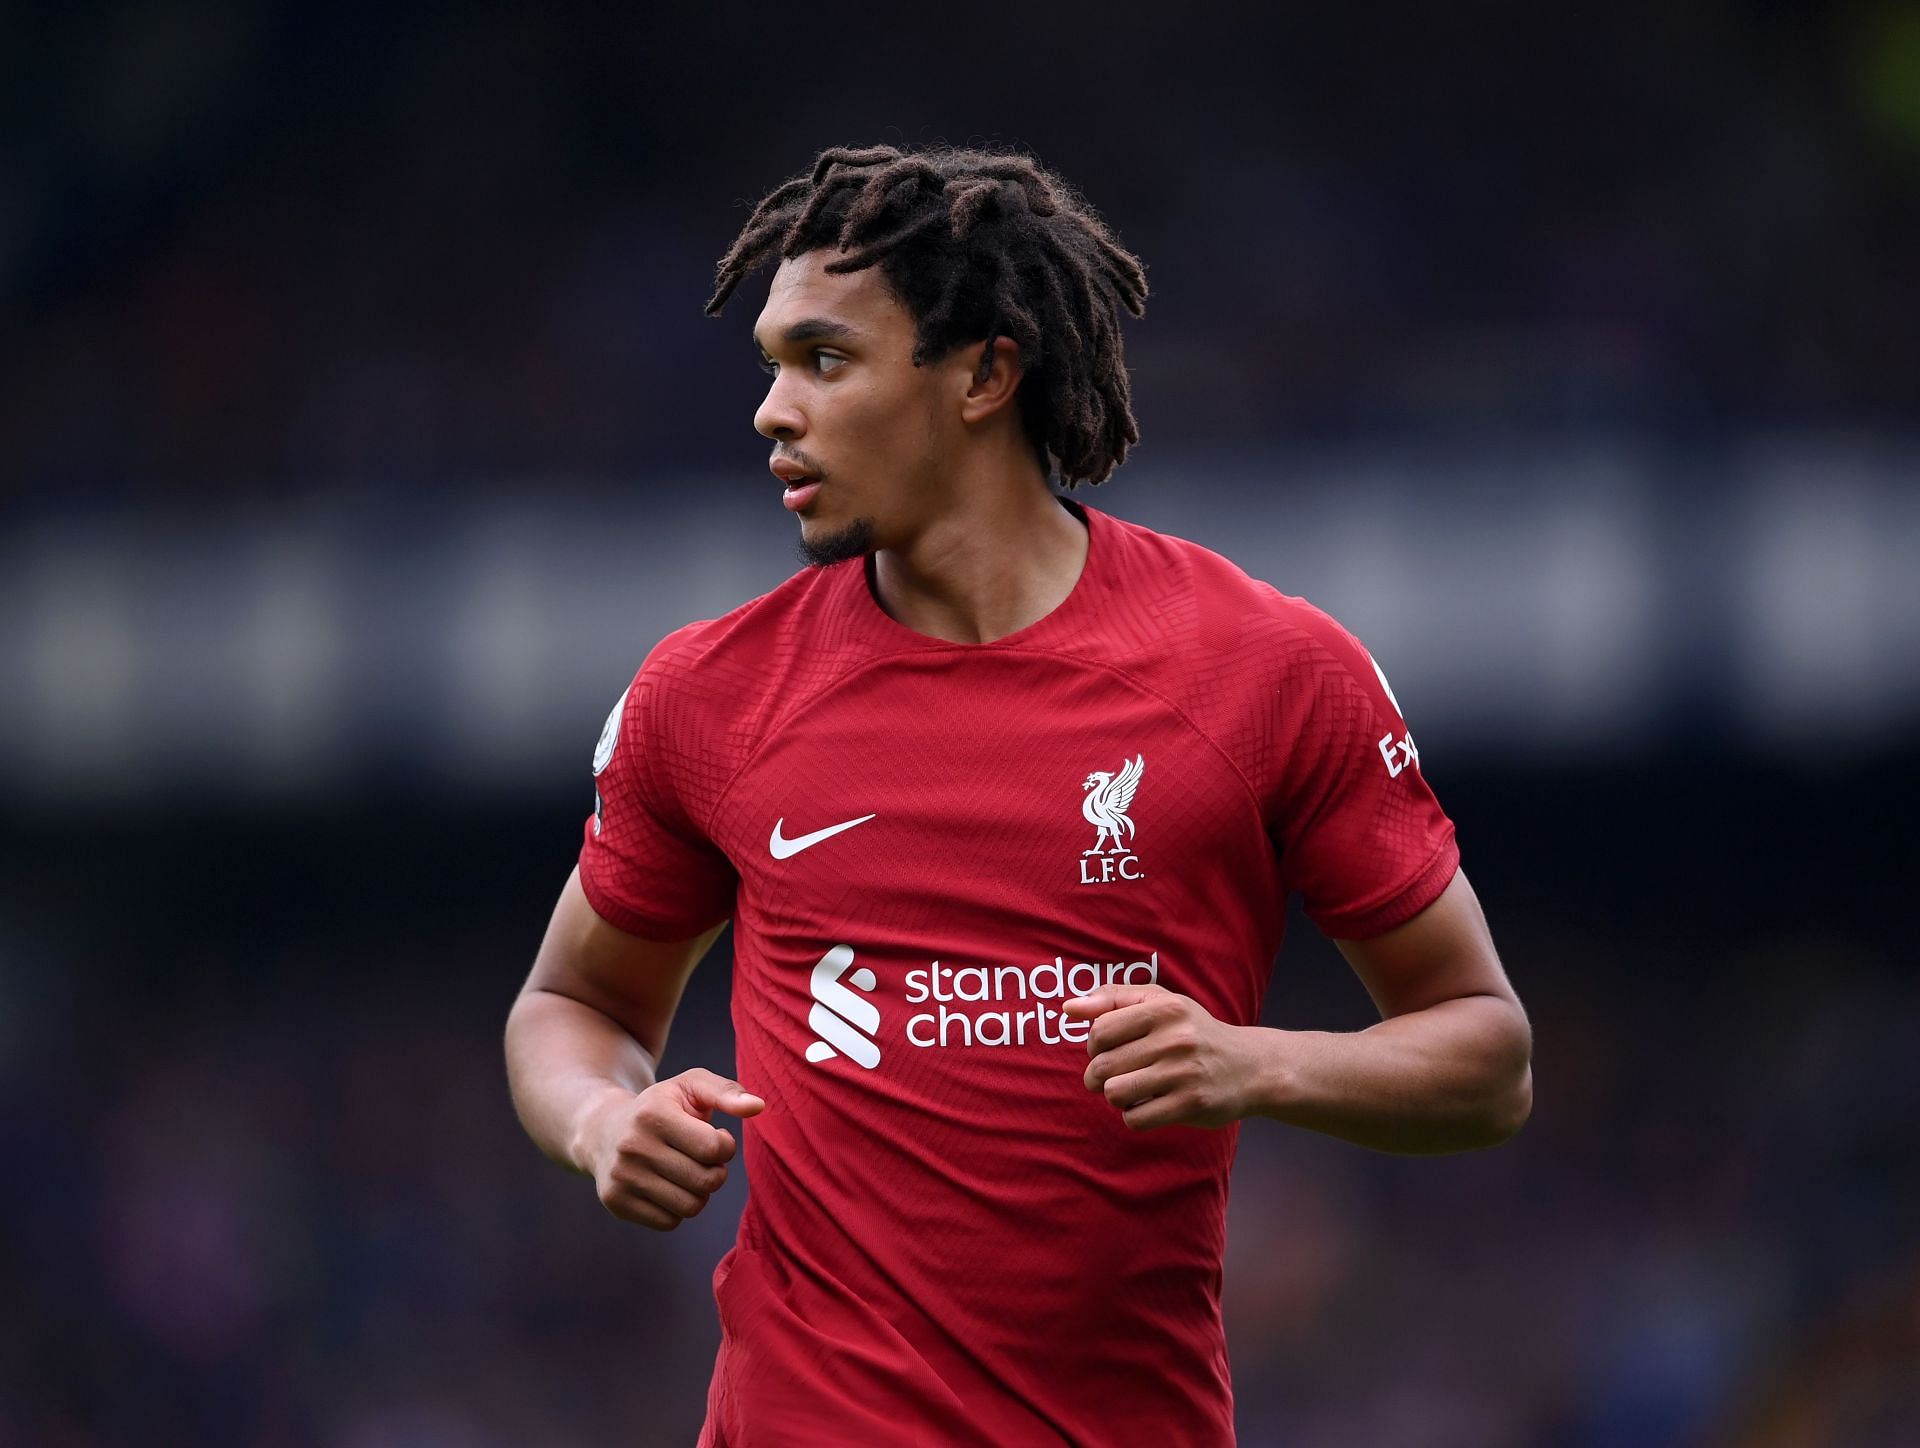 Trent Alexander-Arnold will look to regain his form in coming weeks